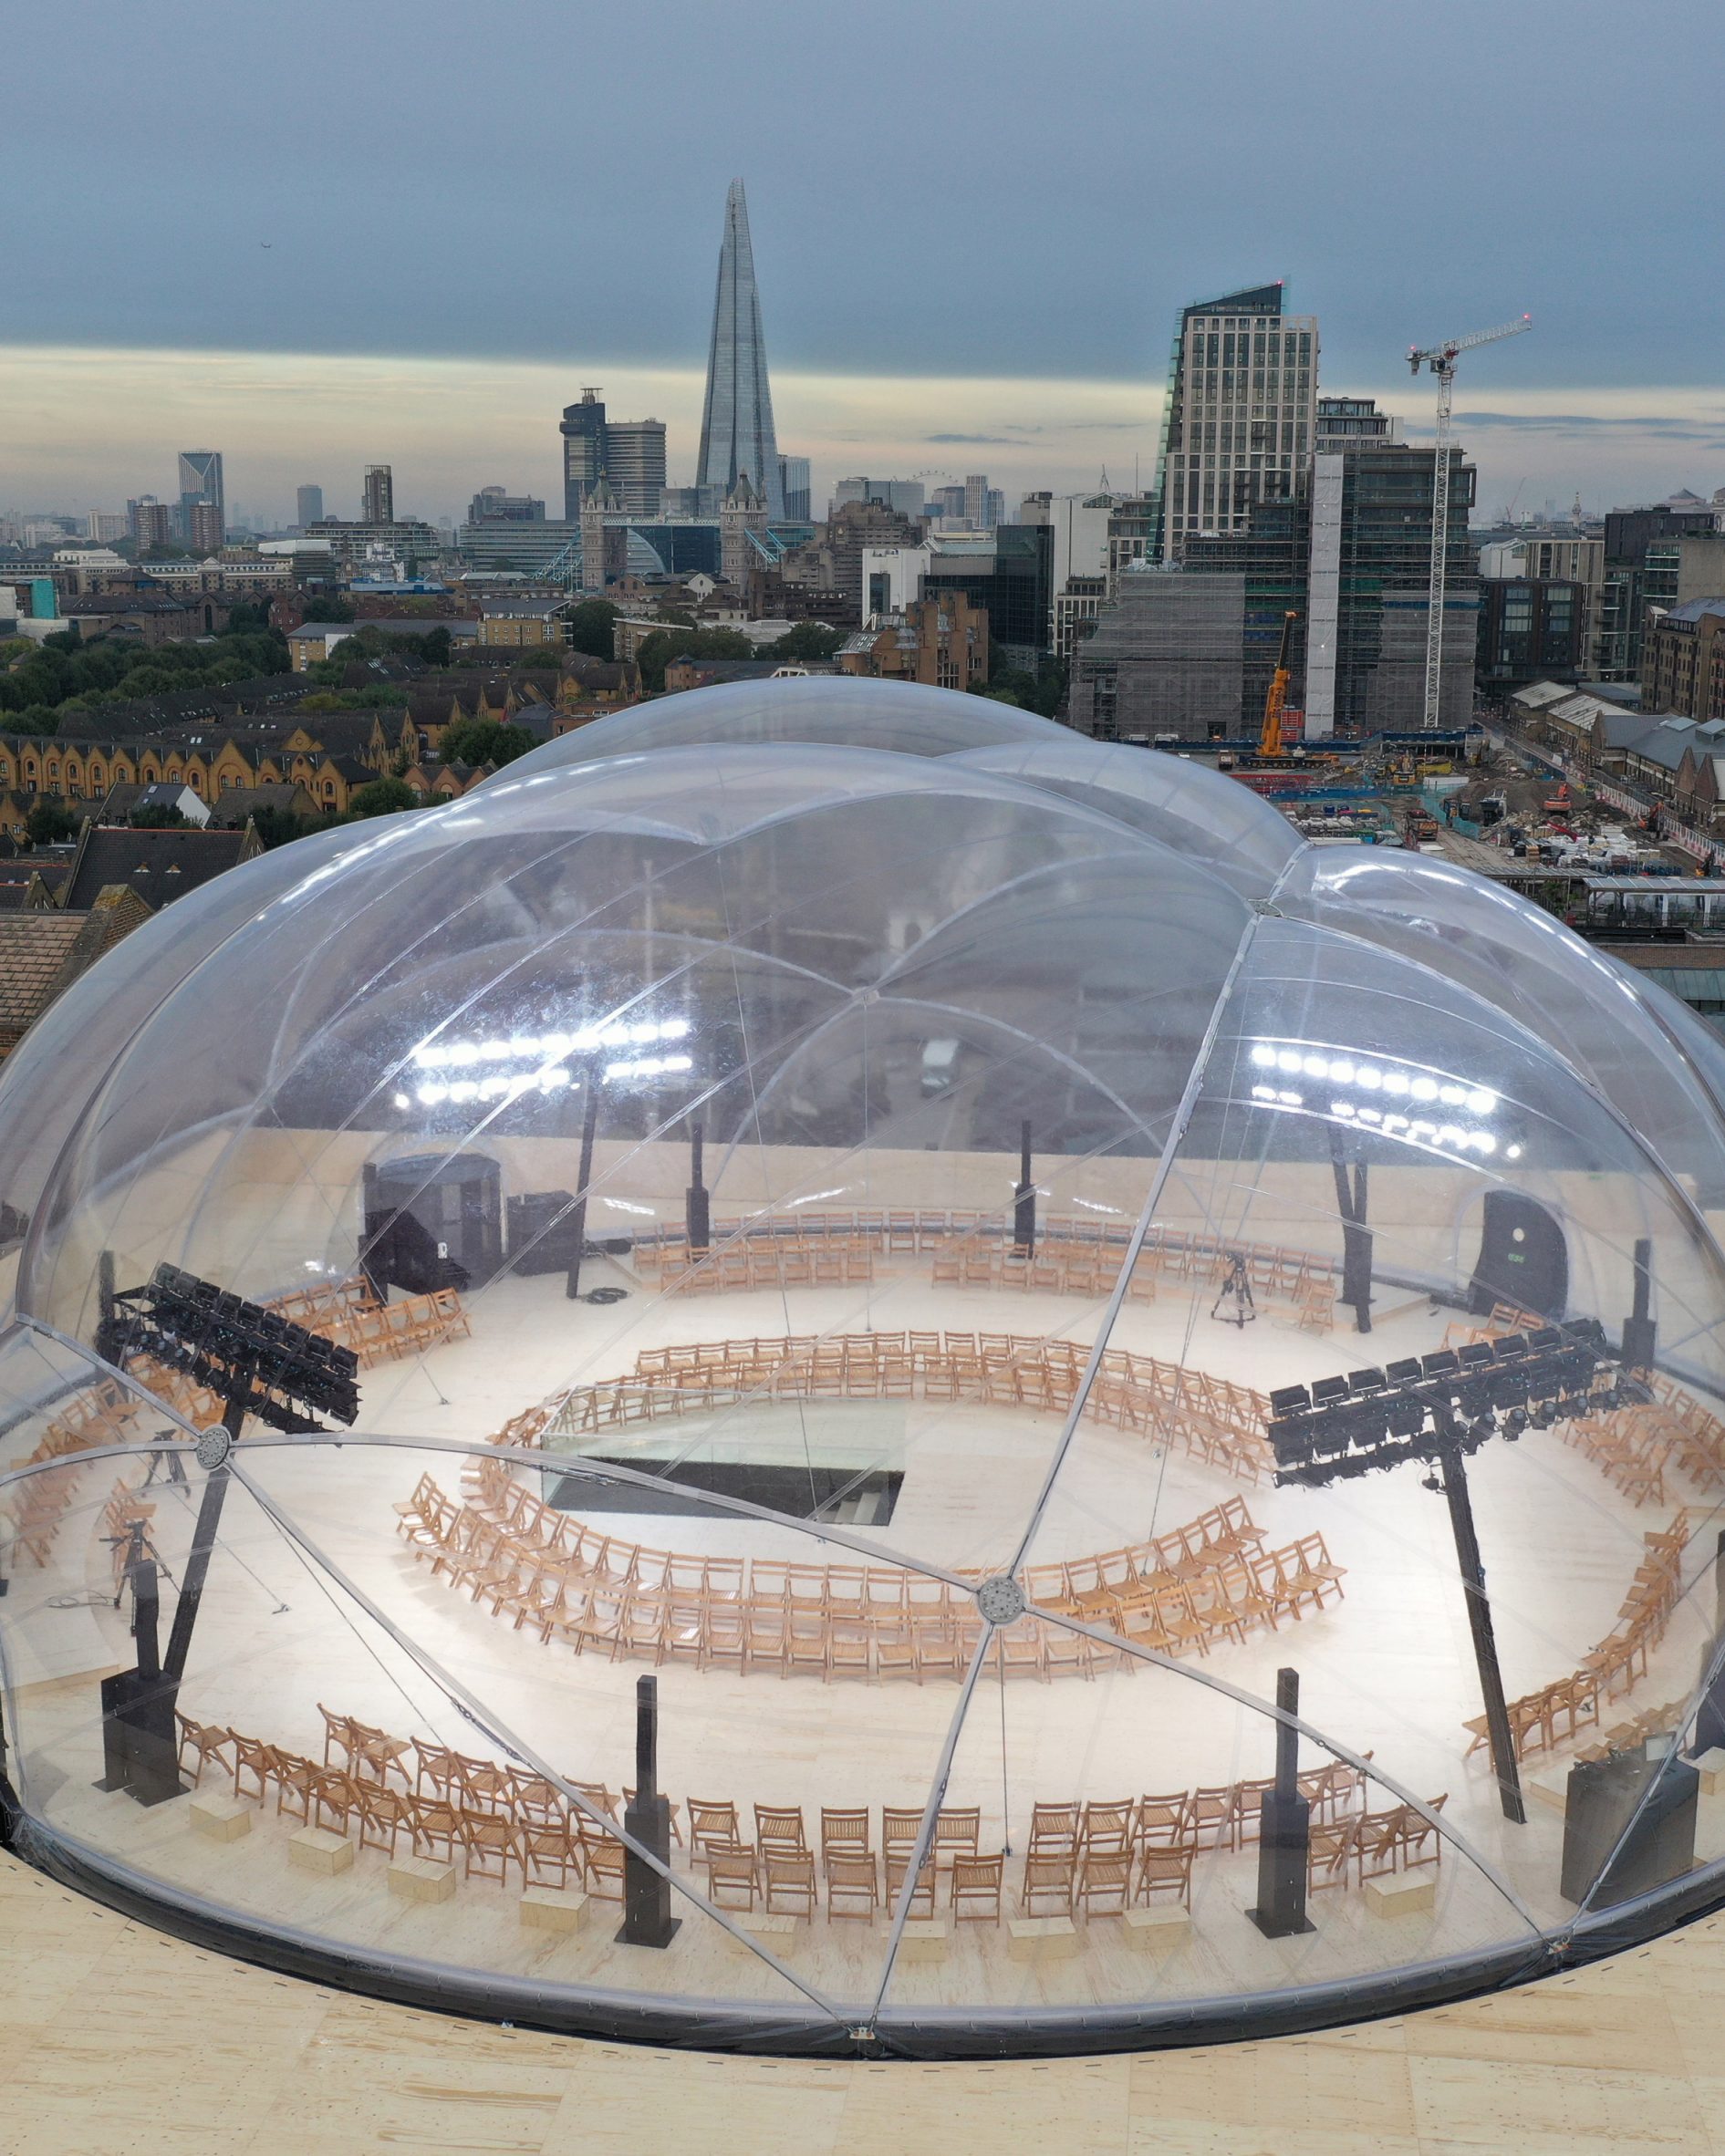 The alexander mcqueen show space by Smiljan radic is pictured against the london skyline